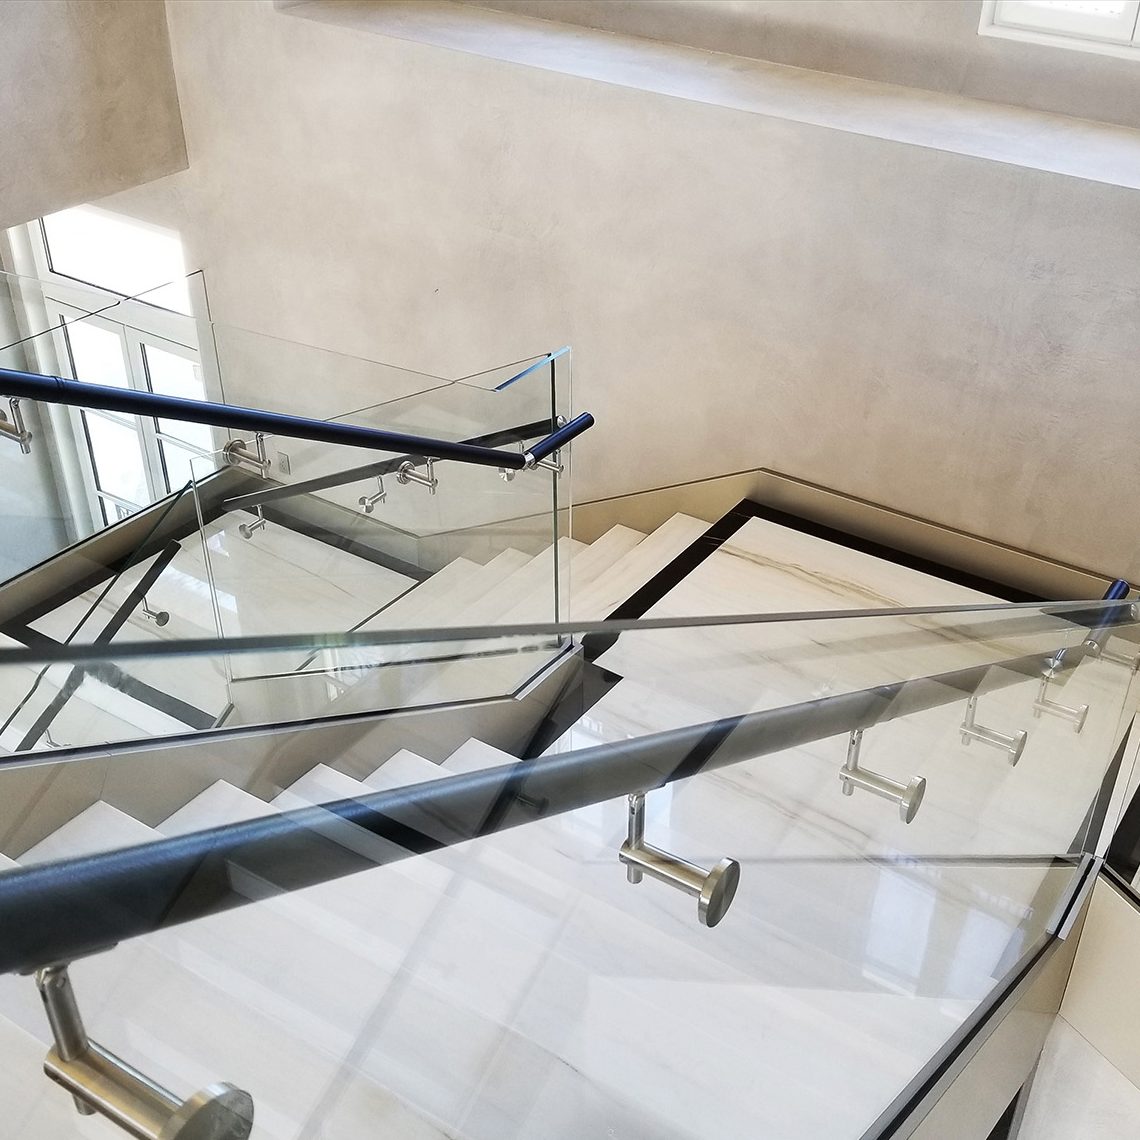 Ddouble ramp staircase glass balustrade, glass balustrade, glass staircase